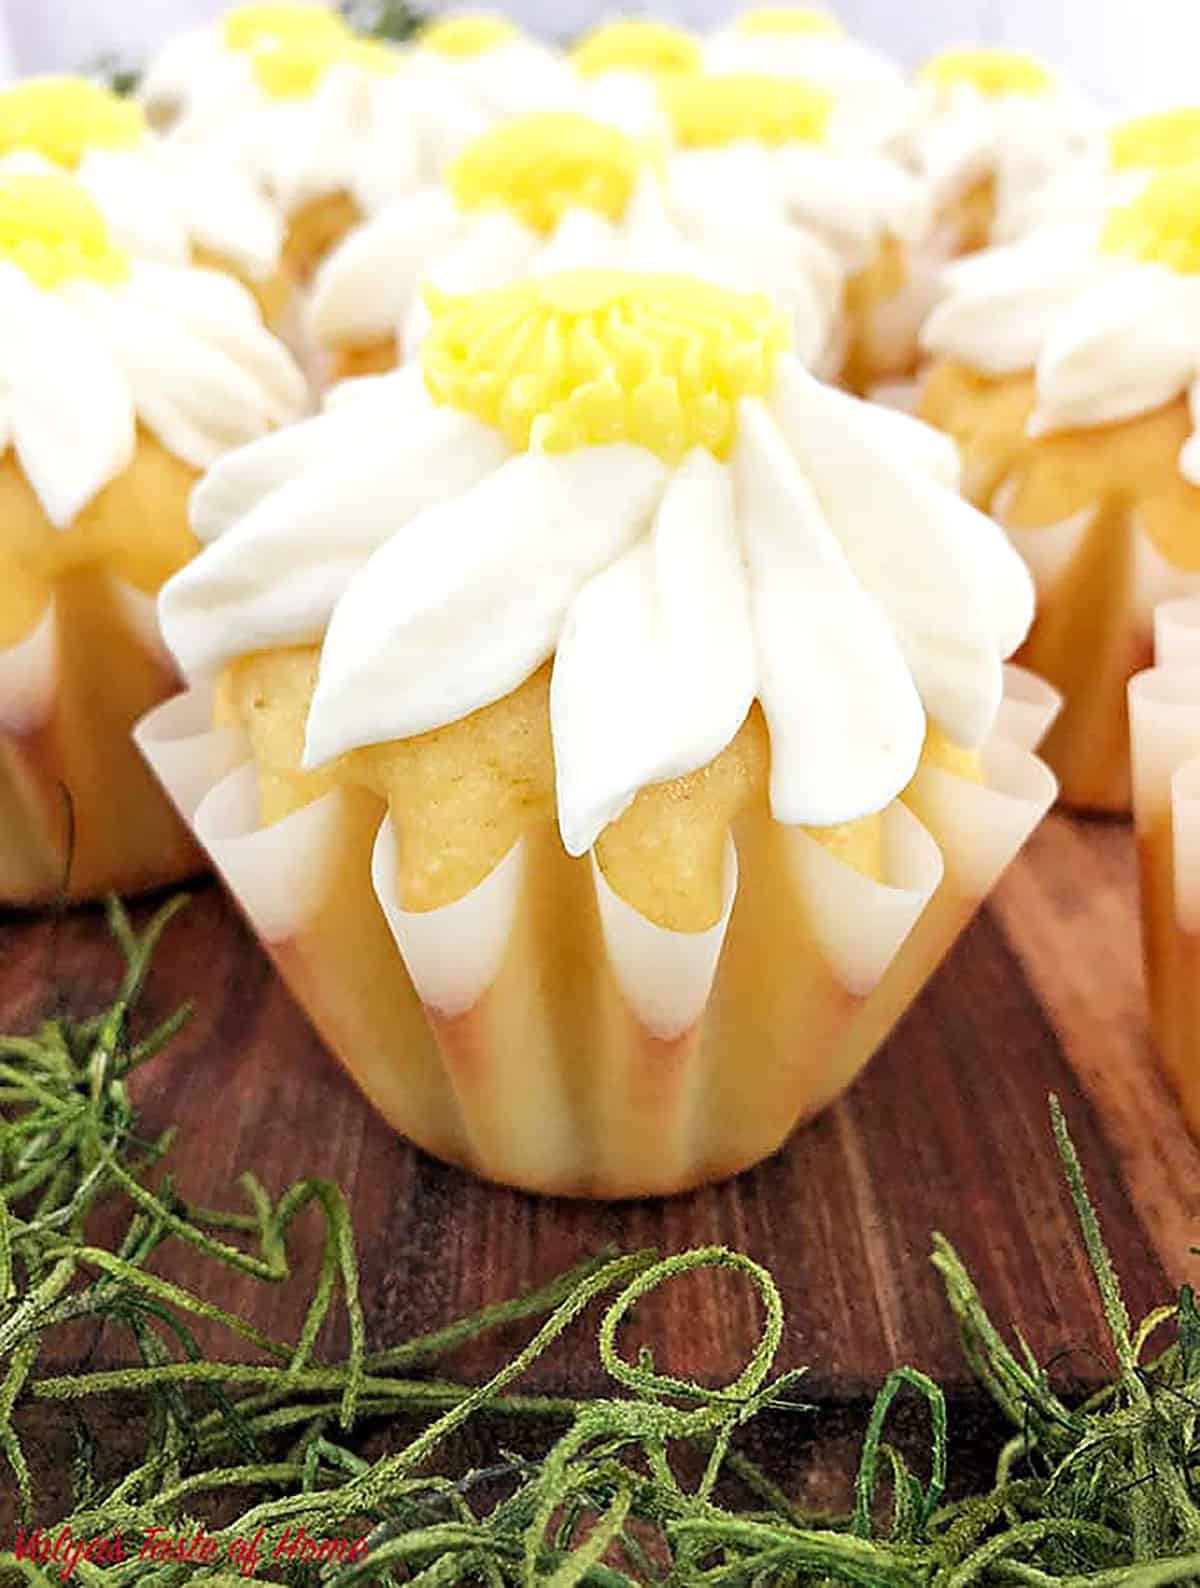 Place the decorated cupcakes into a storage container and close it tightly with a lid.